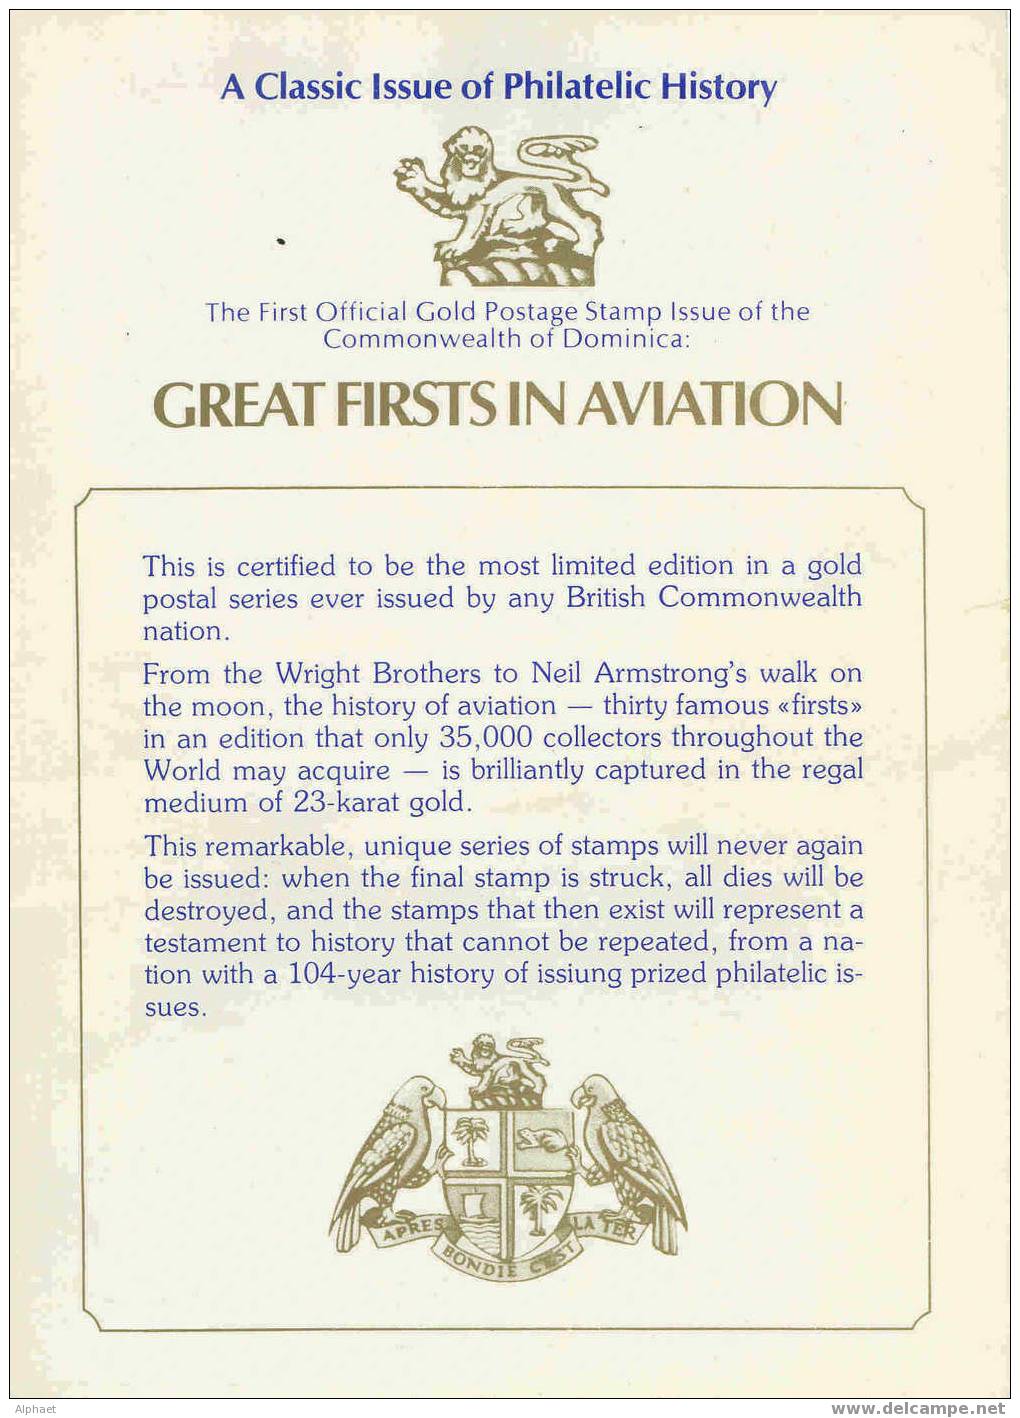 GOLD FOIL "FIRST FLIGHT OVER NORTH POLE", MAY 9,1926 - Dominique (1978-...)